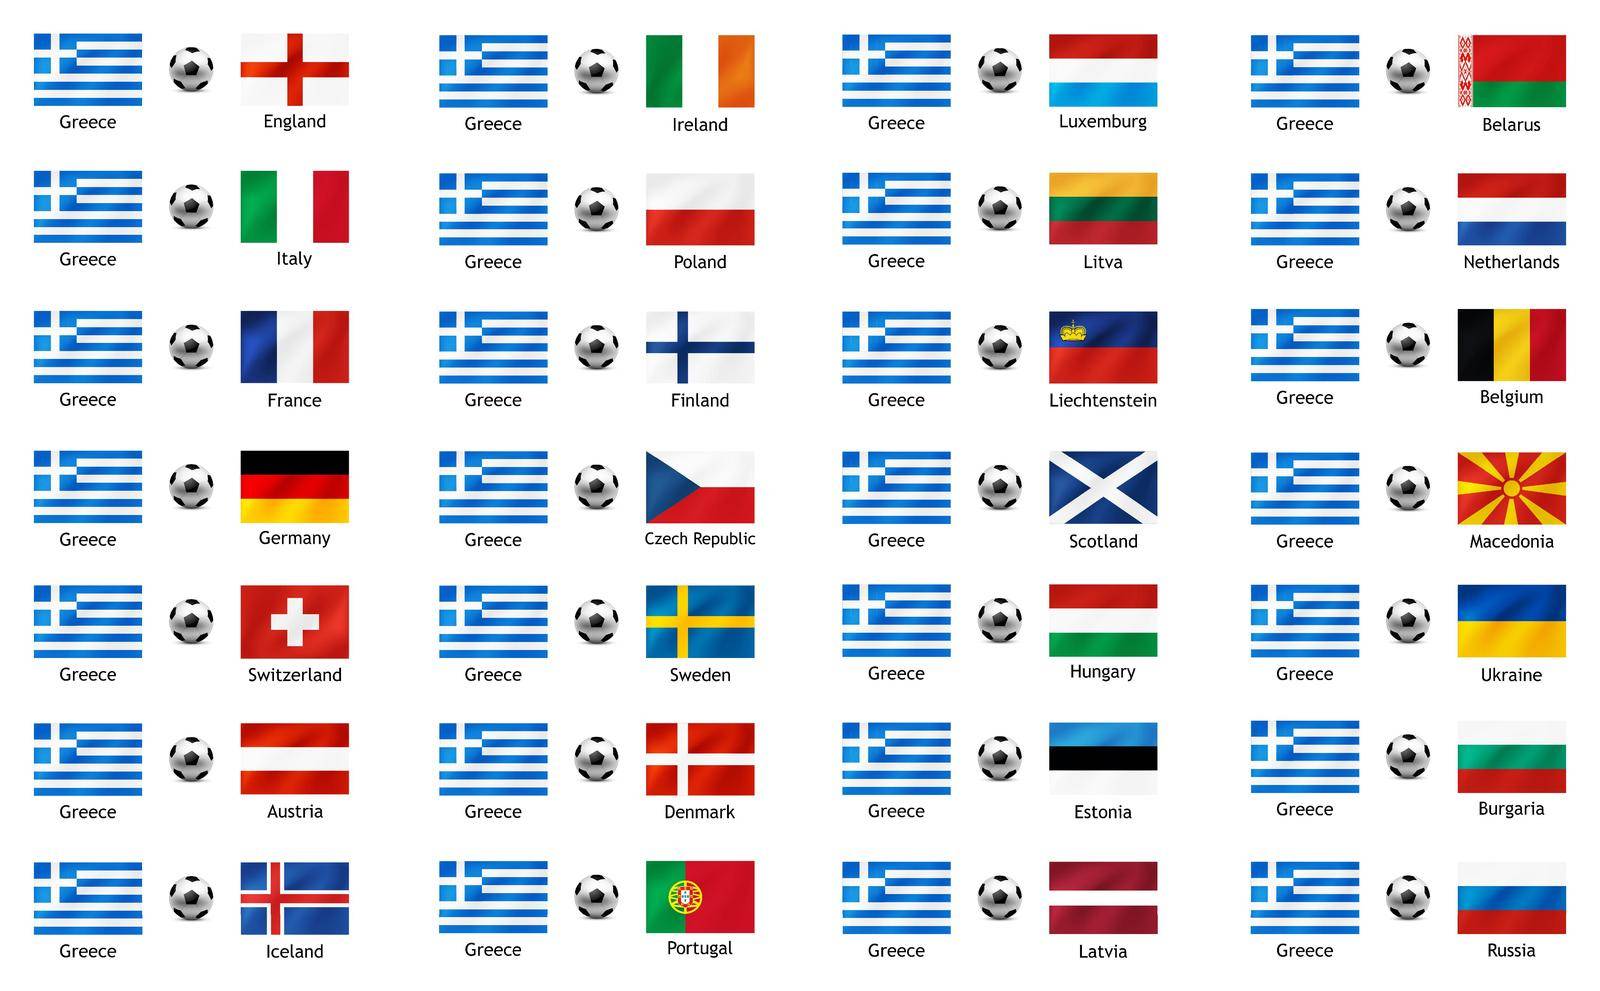 Set of banners to illustrate the sporting rivalry between Greece and European countries. Vector waving flags isolated on white background.